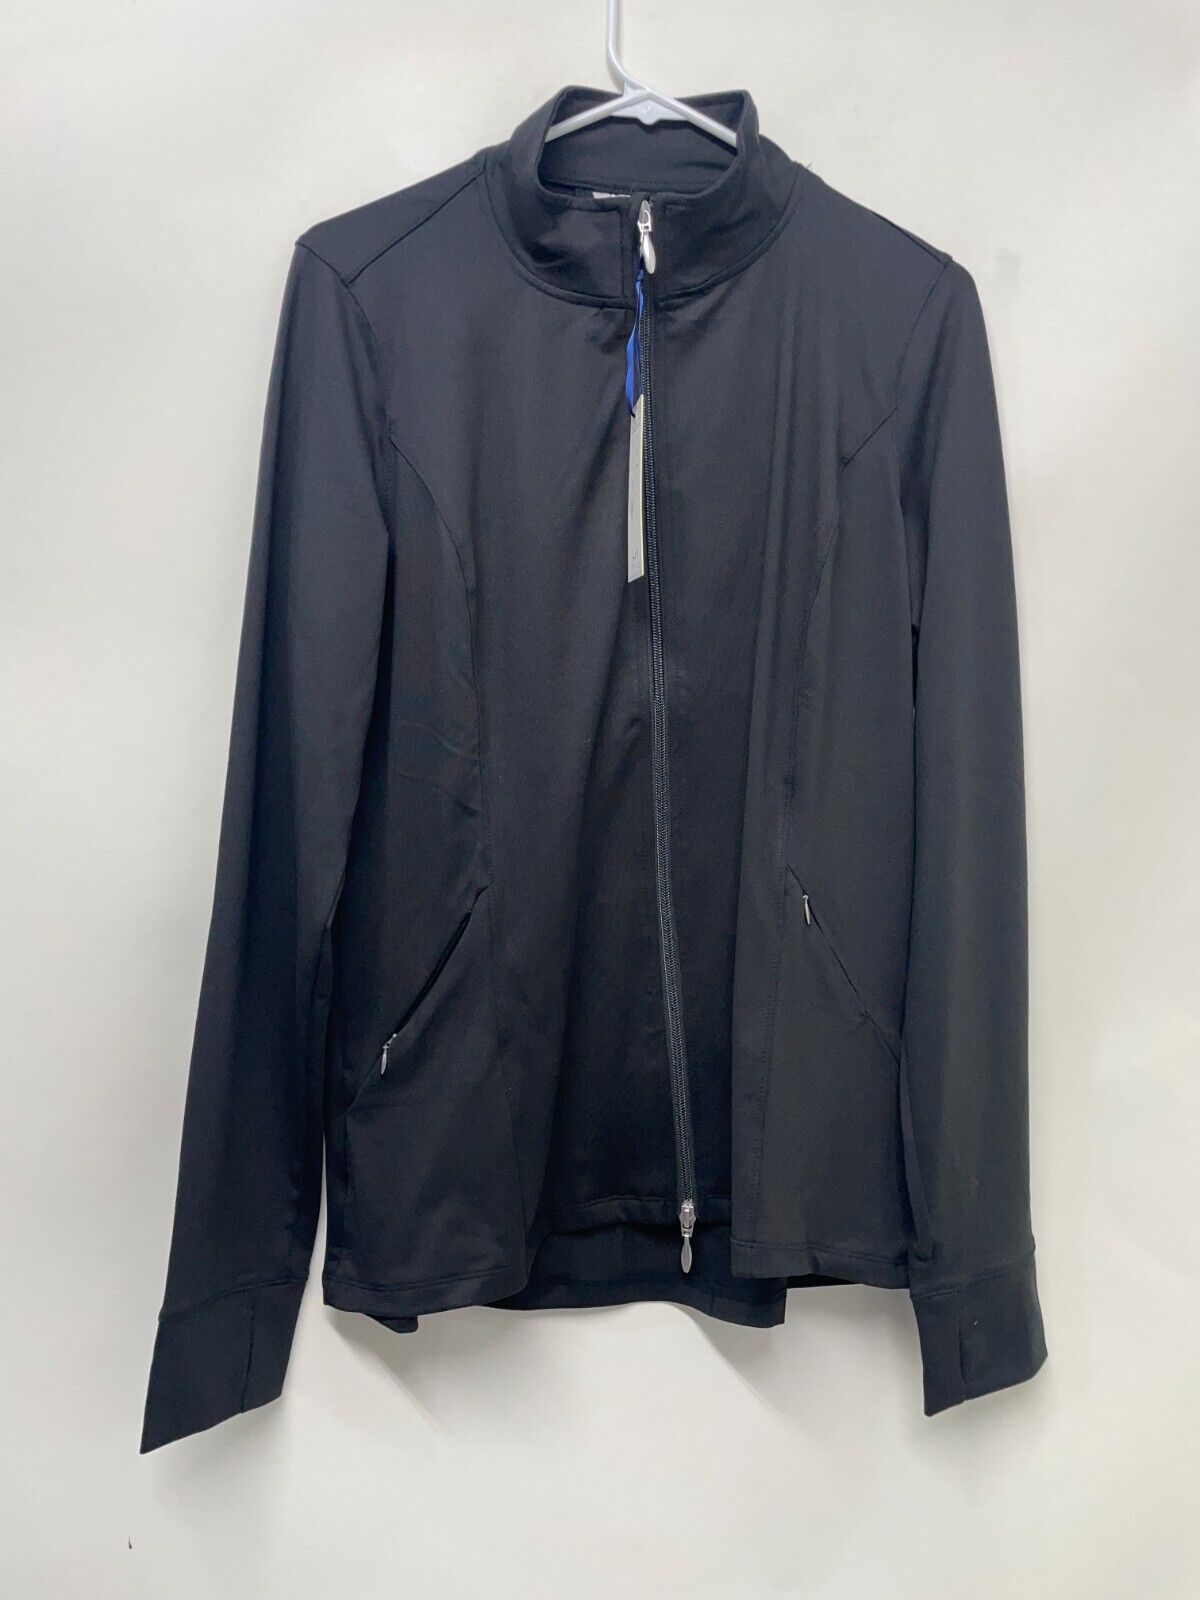 Storyline Collection Women's L Hero Jacket Black Brushed Tech Fabric Zip Up NWT